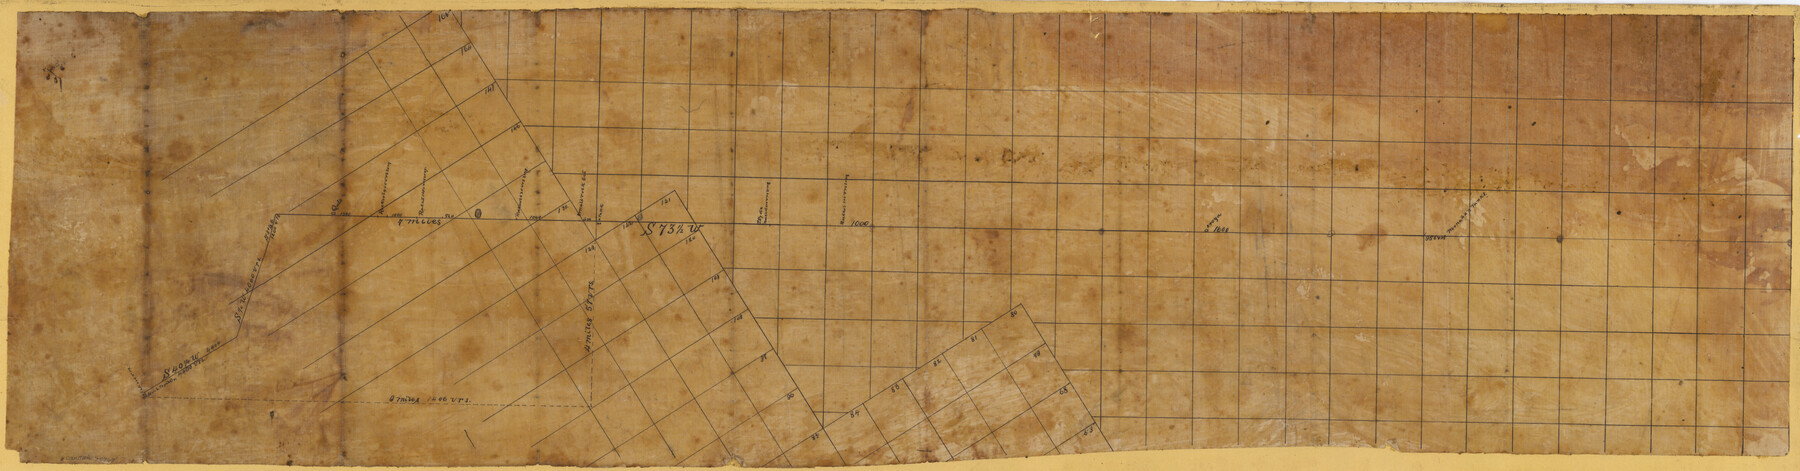 75767, [Sketch of Surveys in Ward County, Texas], Maddox Collection